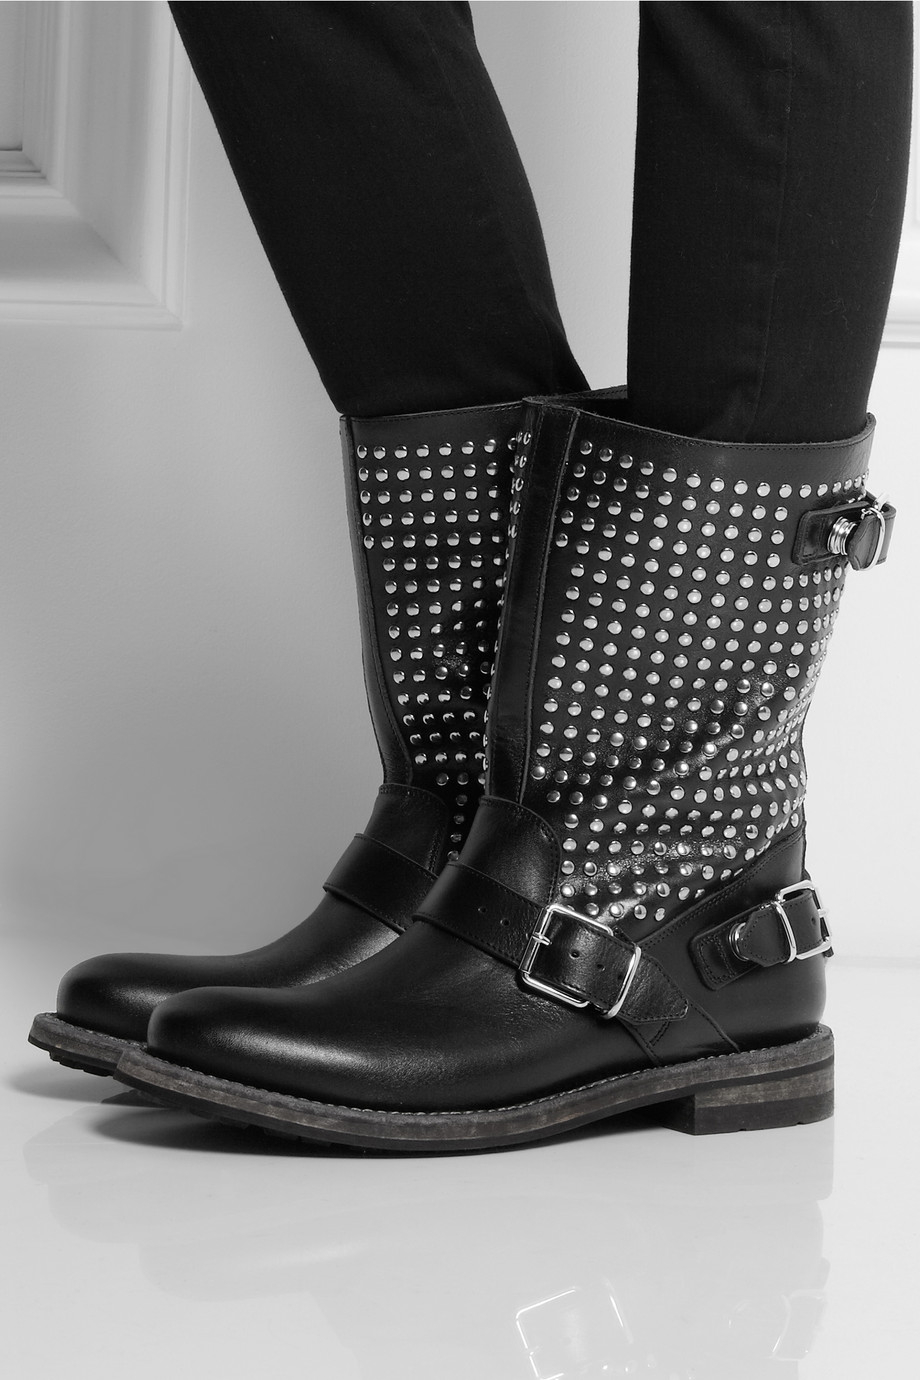 Burberry Studded Leather Biker Boots in 